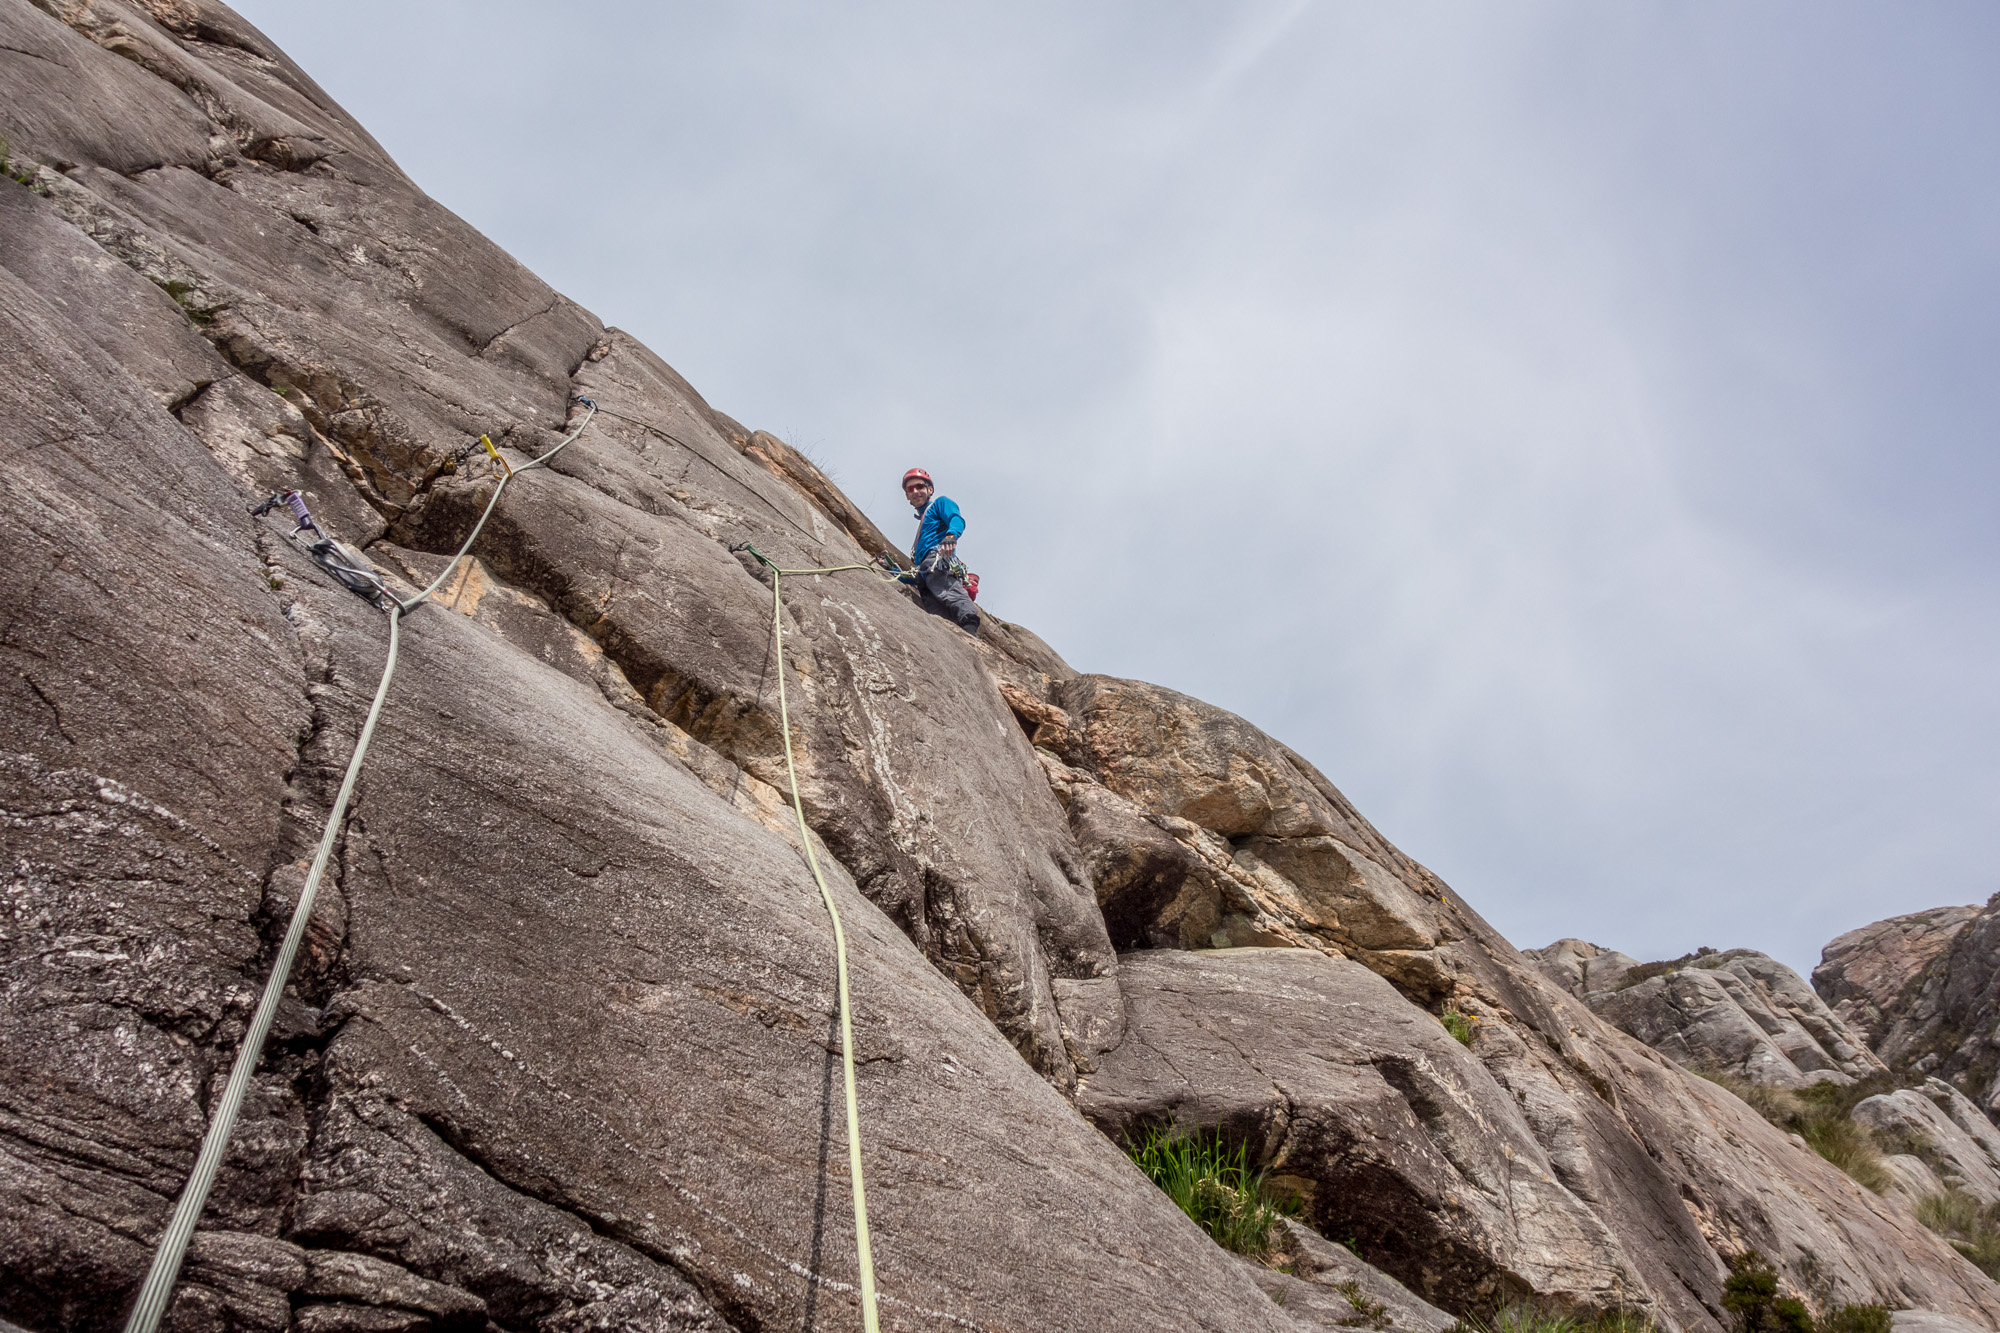 scottish summer rock climbing on route one diabaig